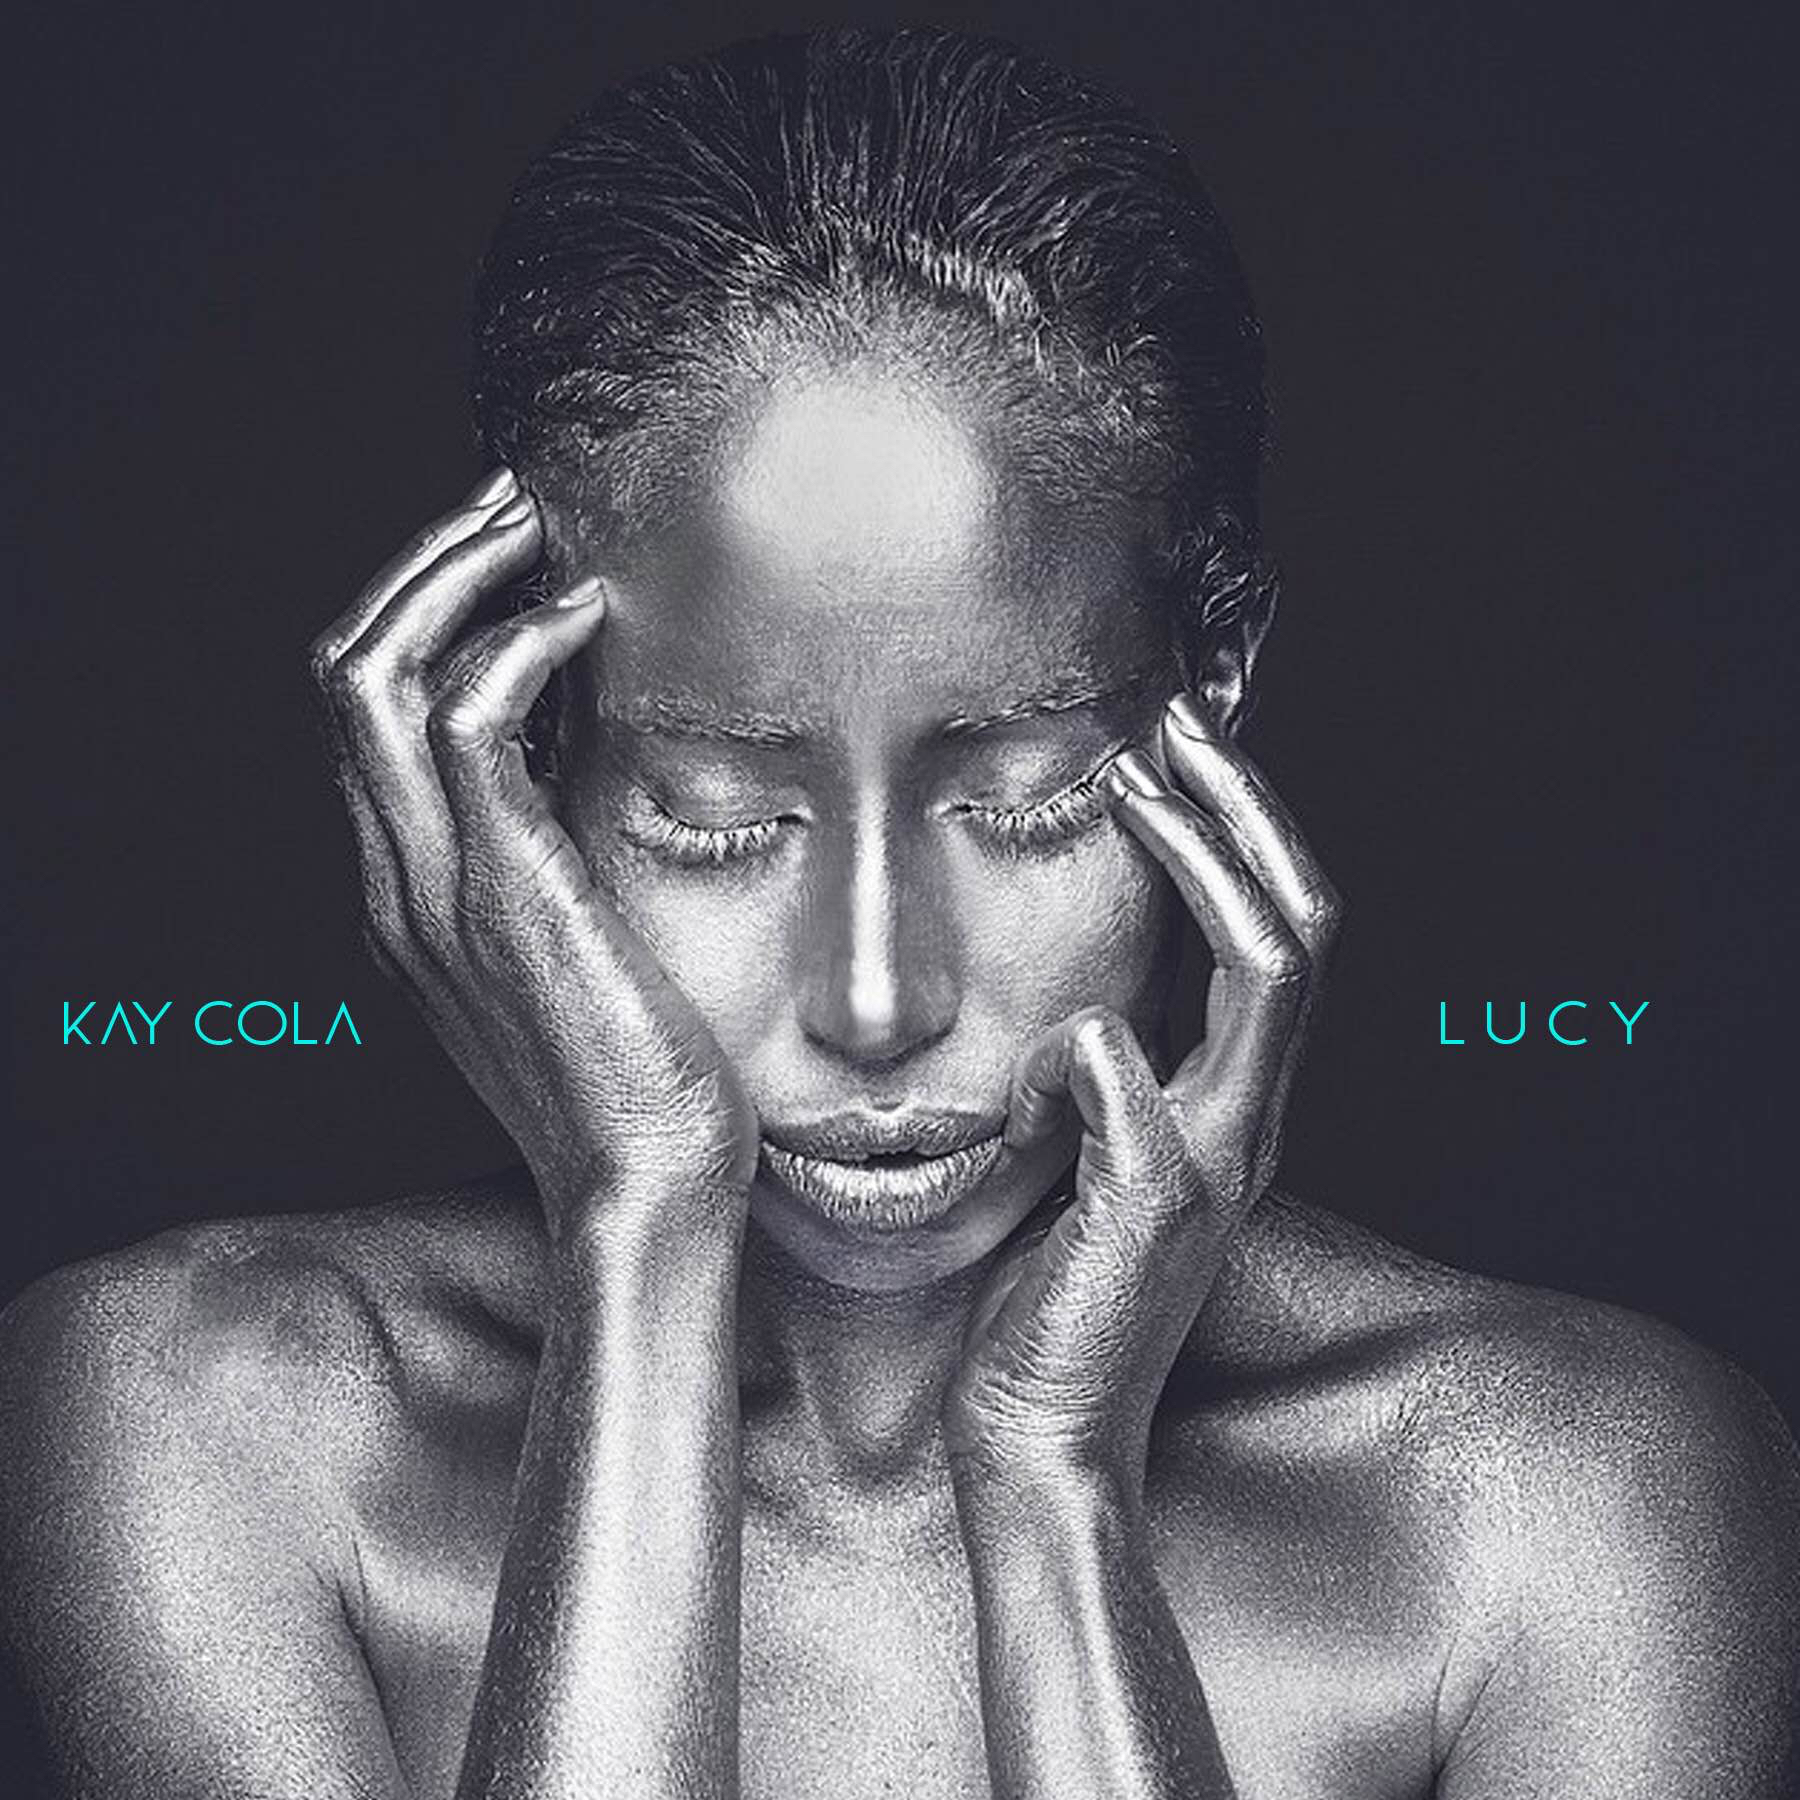 kay-cola_lucy-cover-1